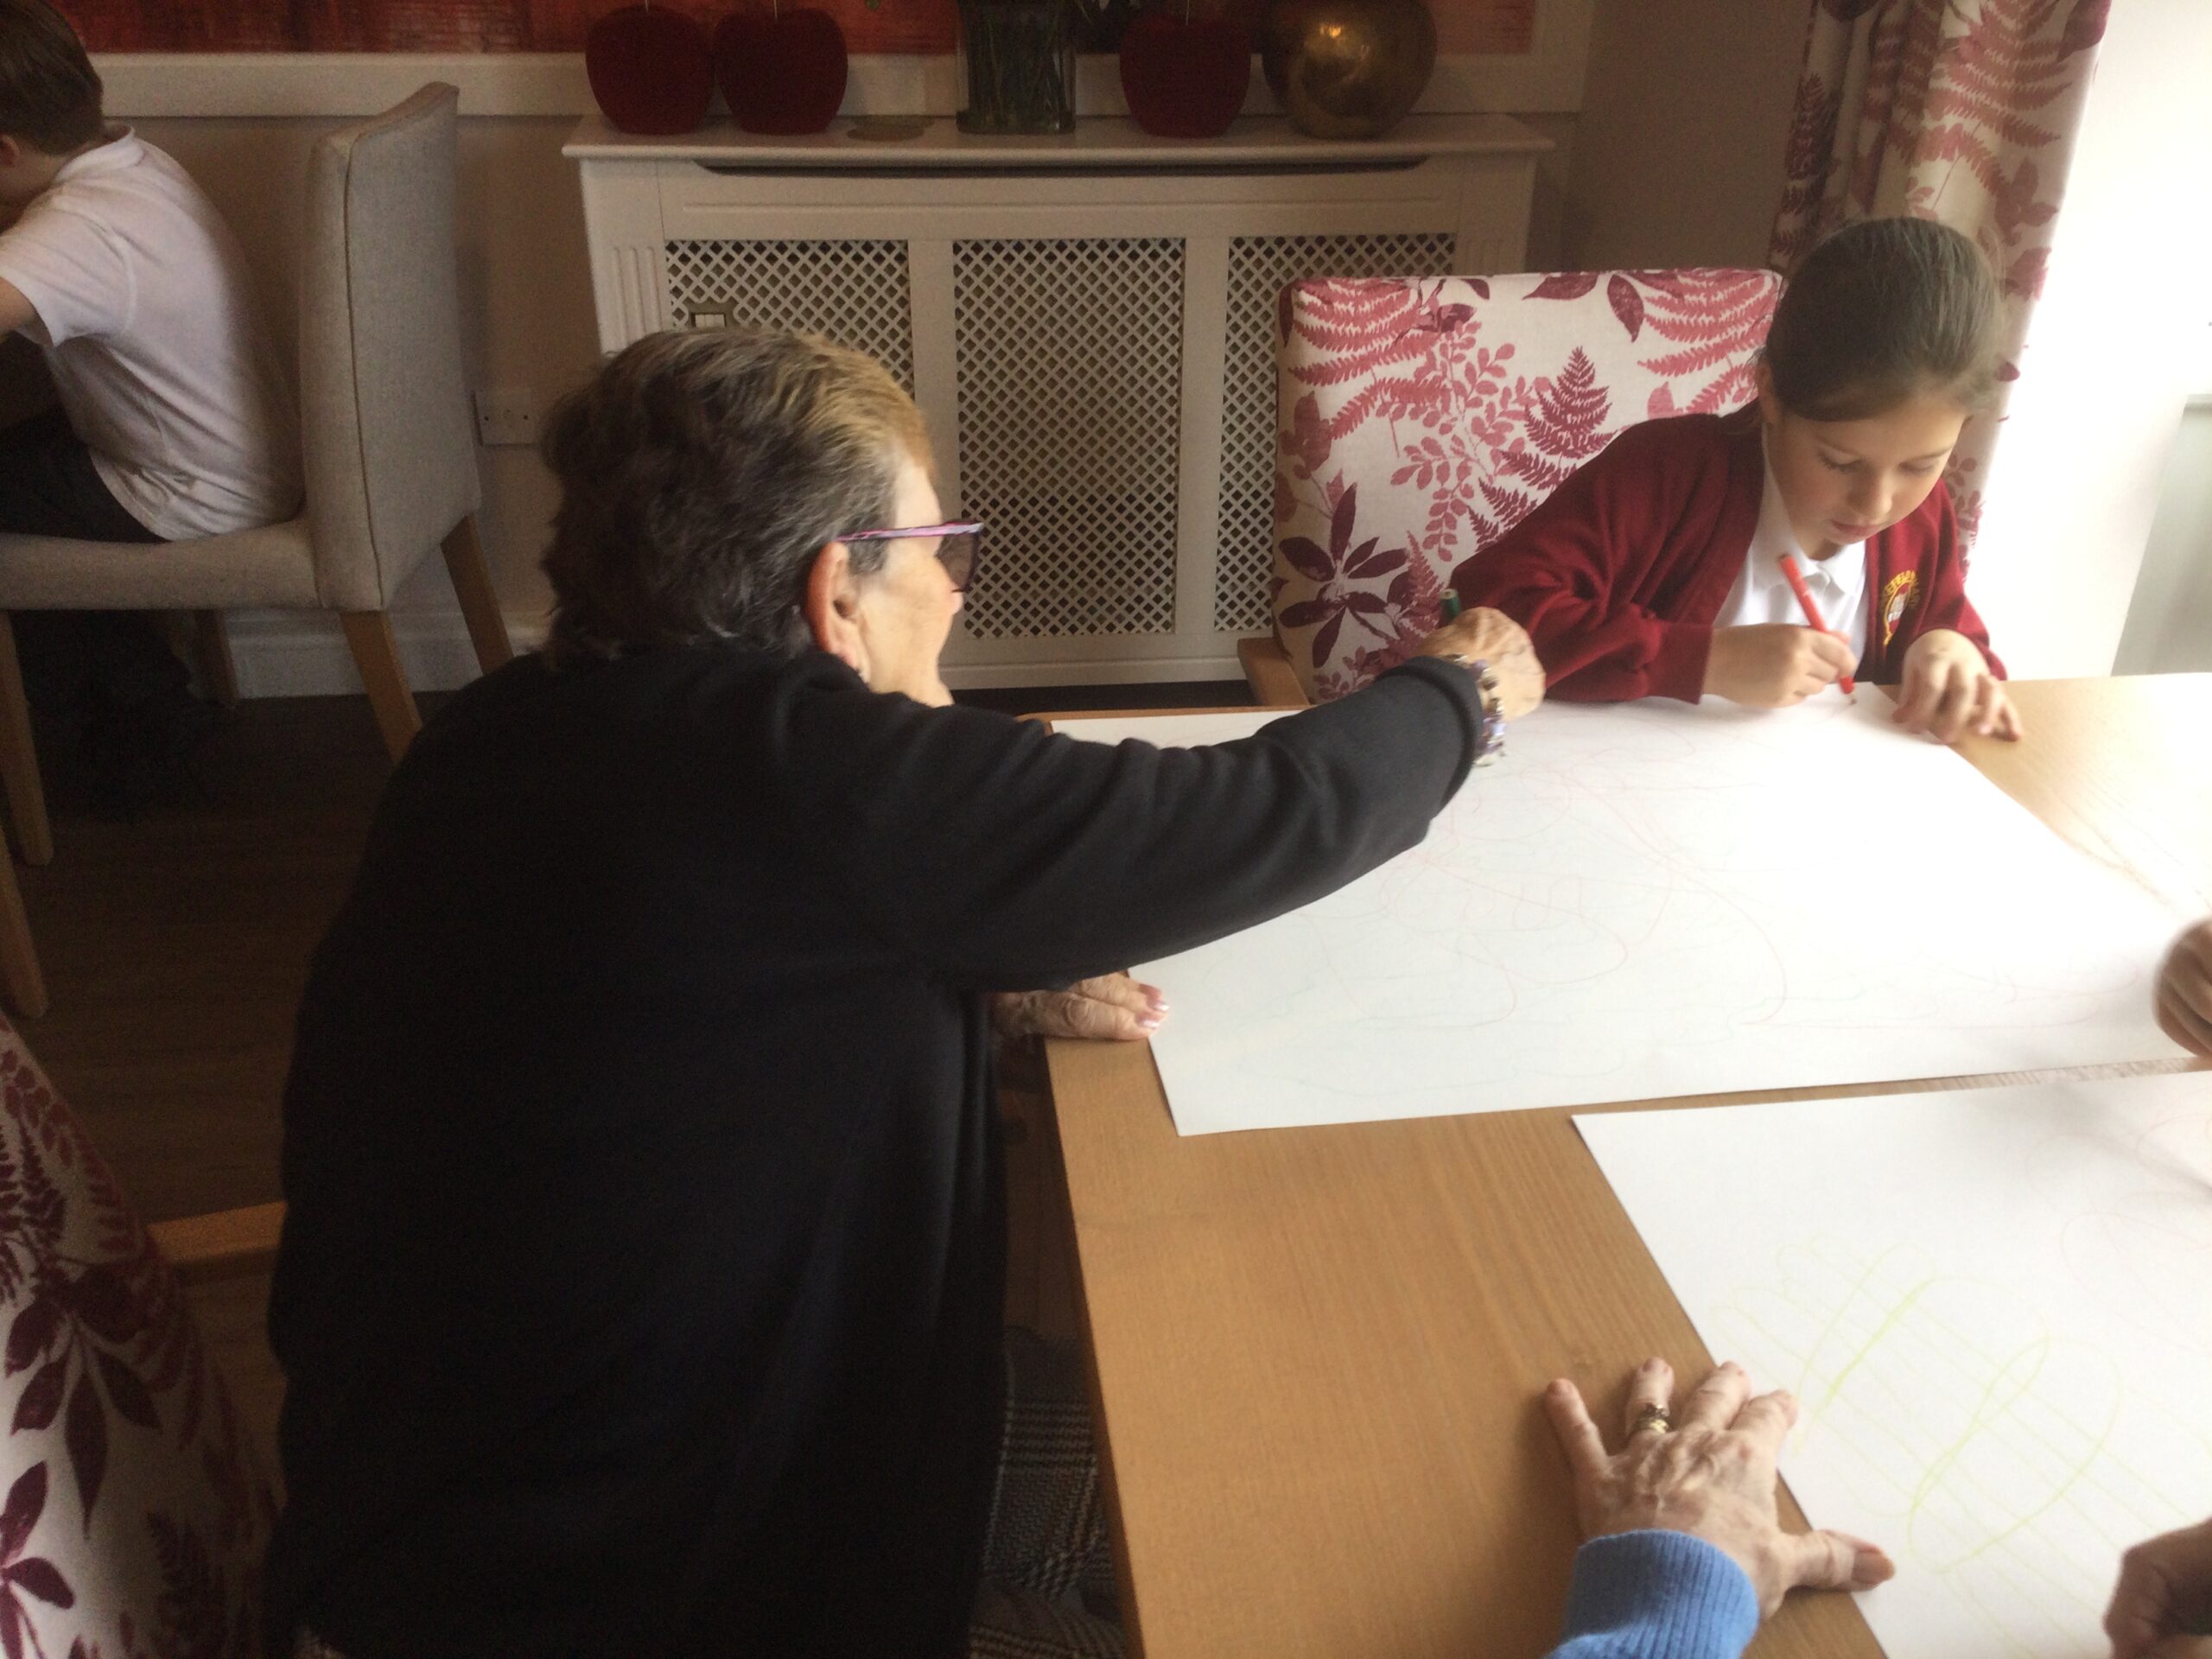 Large sheets of paper on a table top with adults and a school child drawing on them